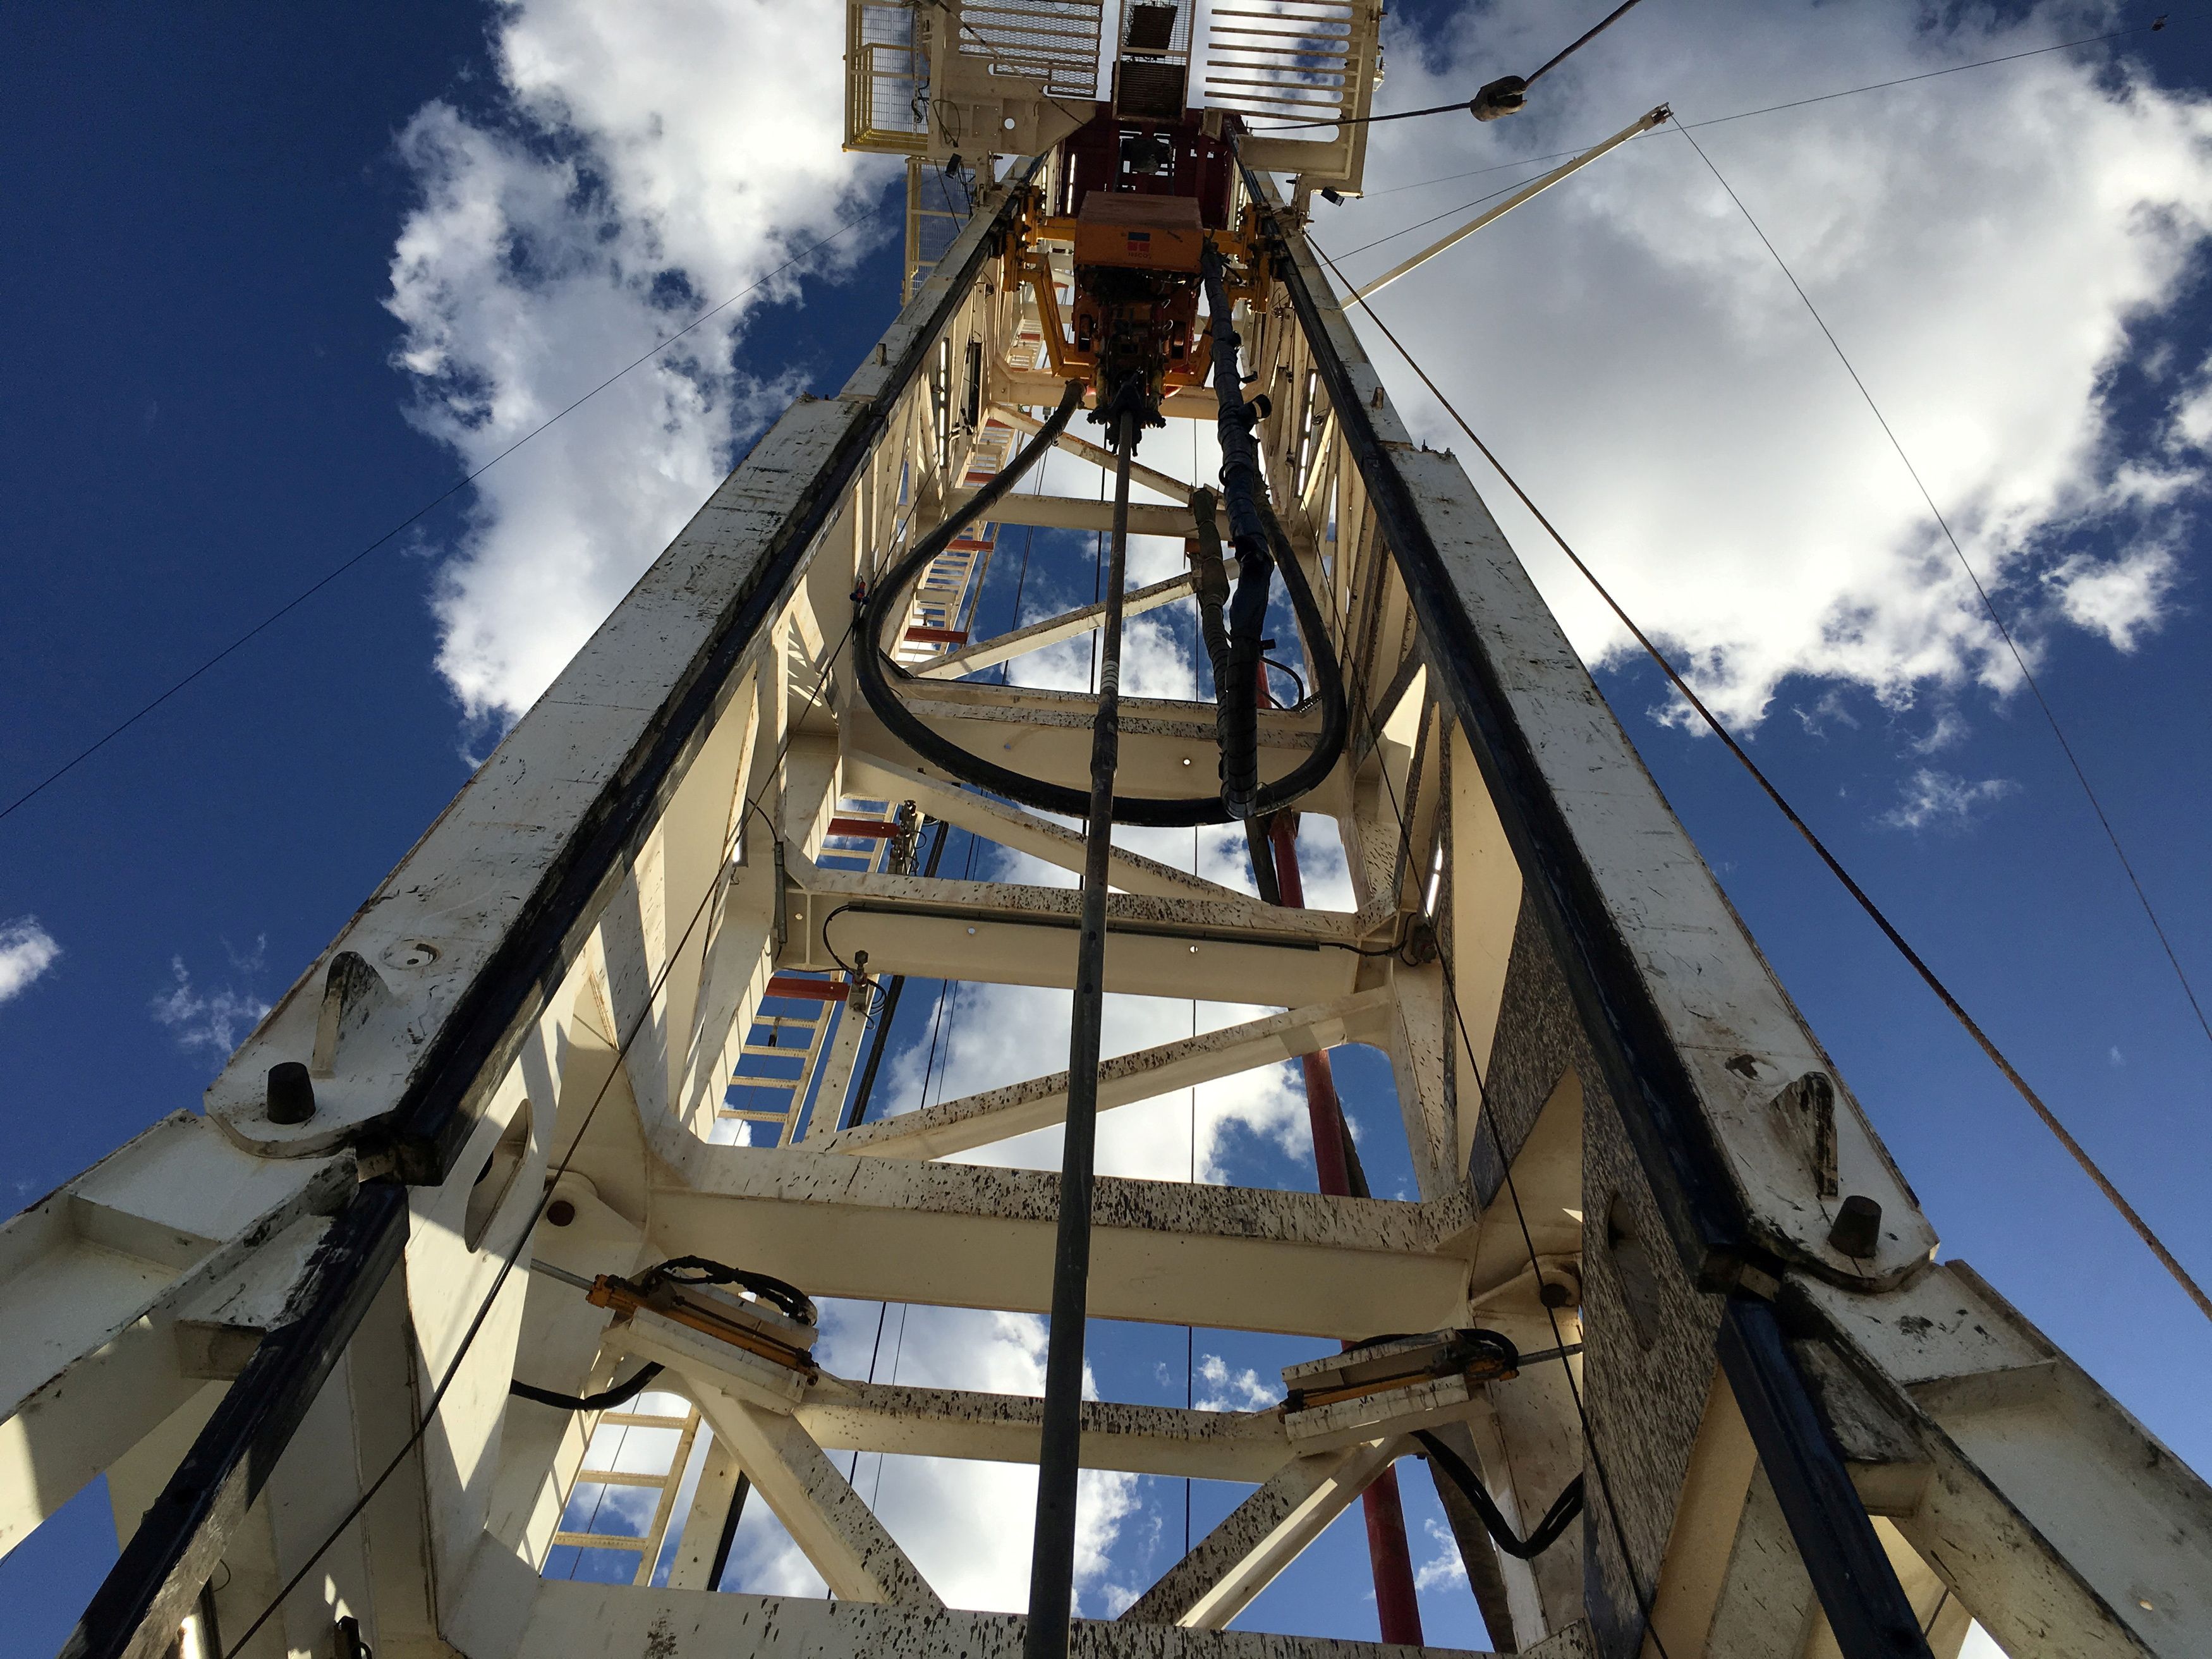 The Elevation Resources drilling rig is shown at the Permian Basin drilling site in Andrews County, Texas, U.S.  in this photo taken May 16, 2016. REUTERS/Ann Saphir